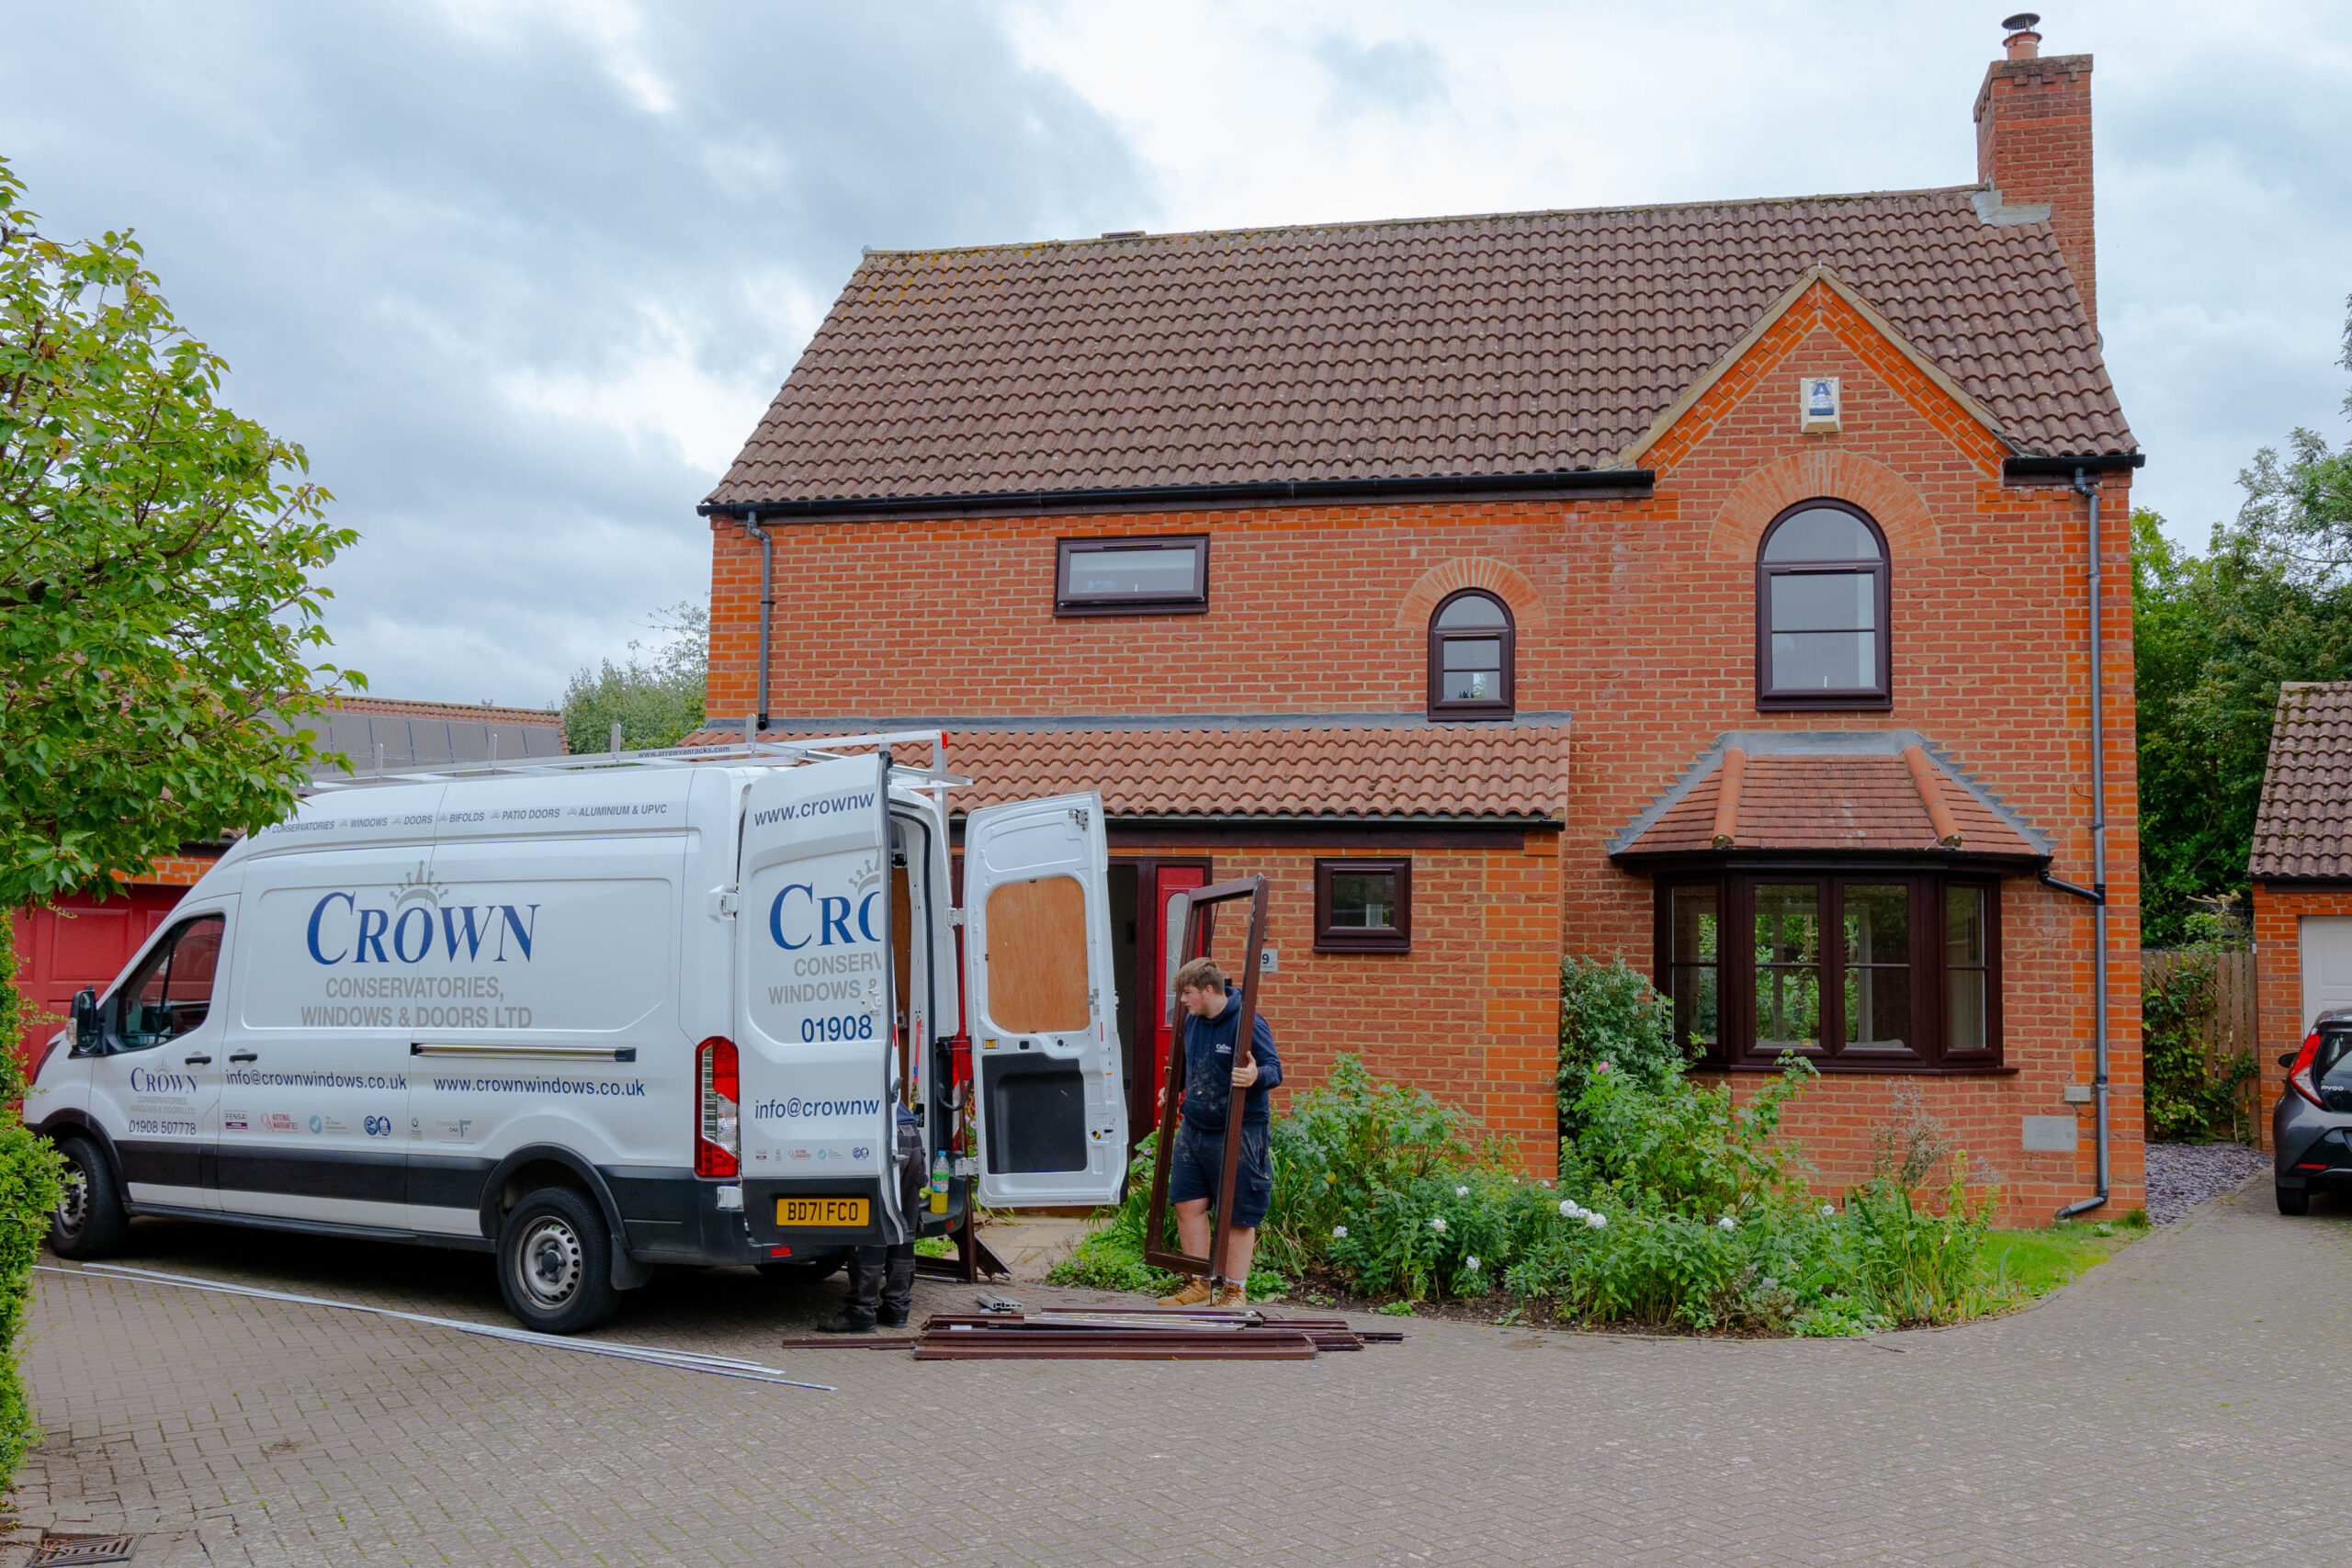 crown van outside property scaled 1